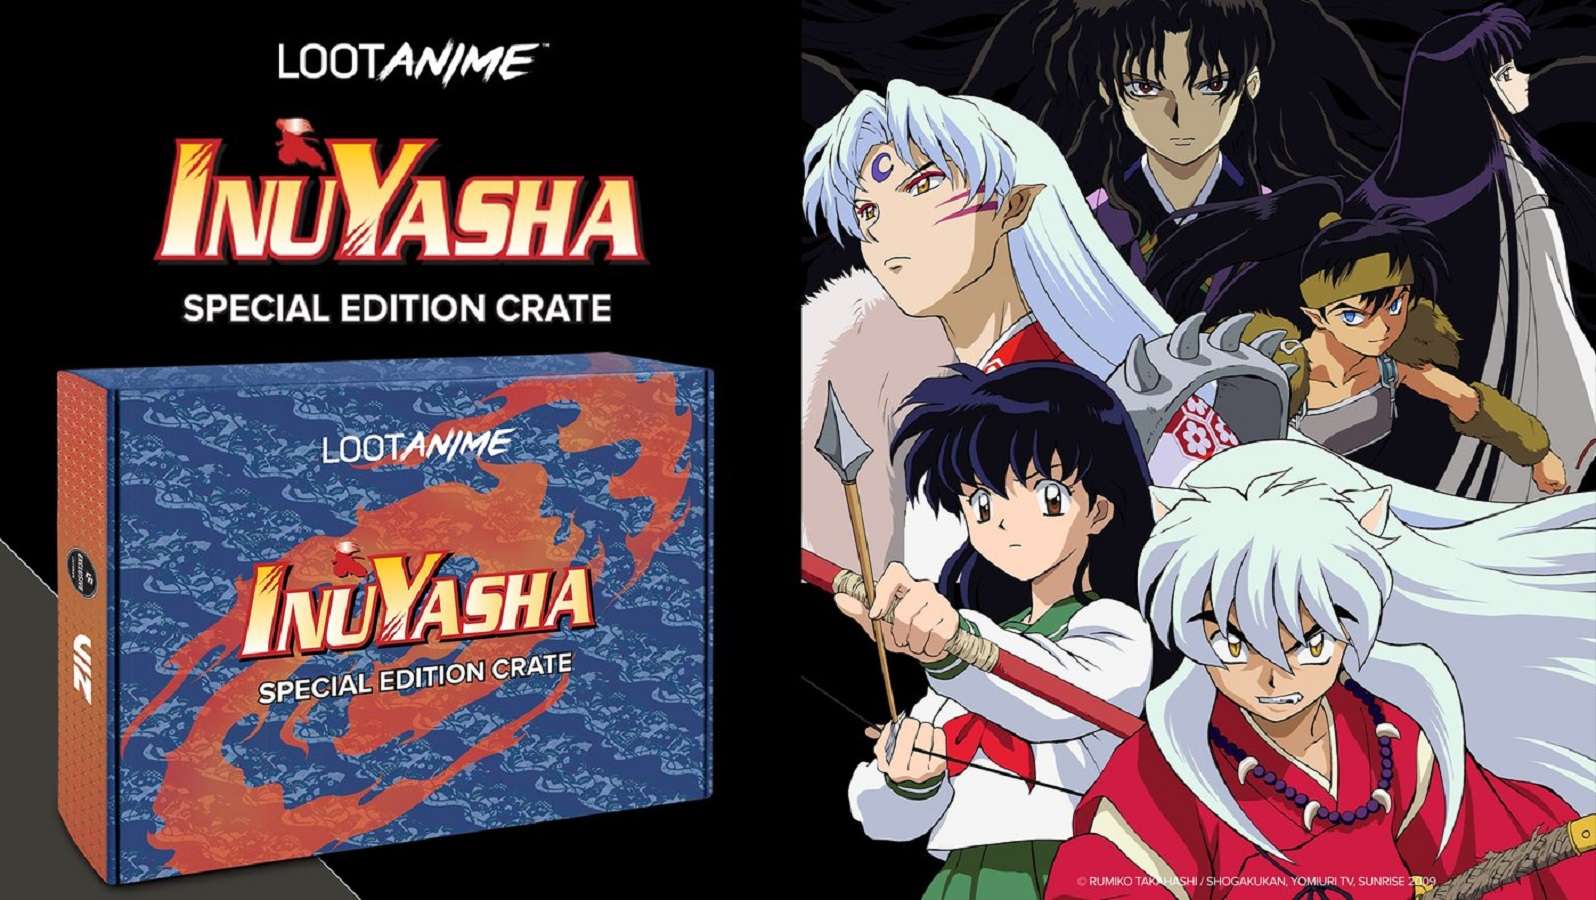 Inuyasha Special Edition Crate